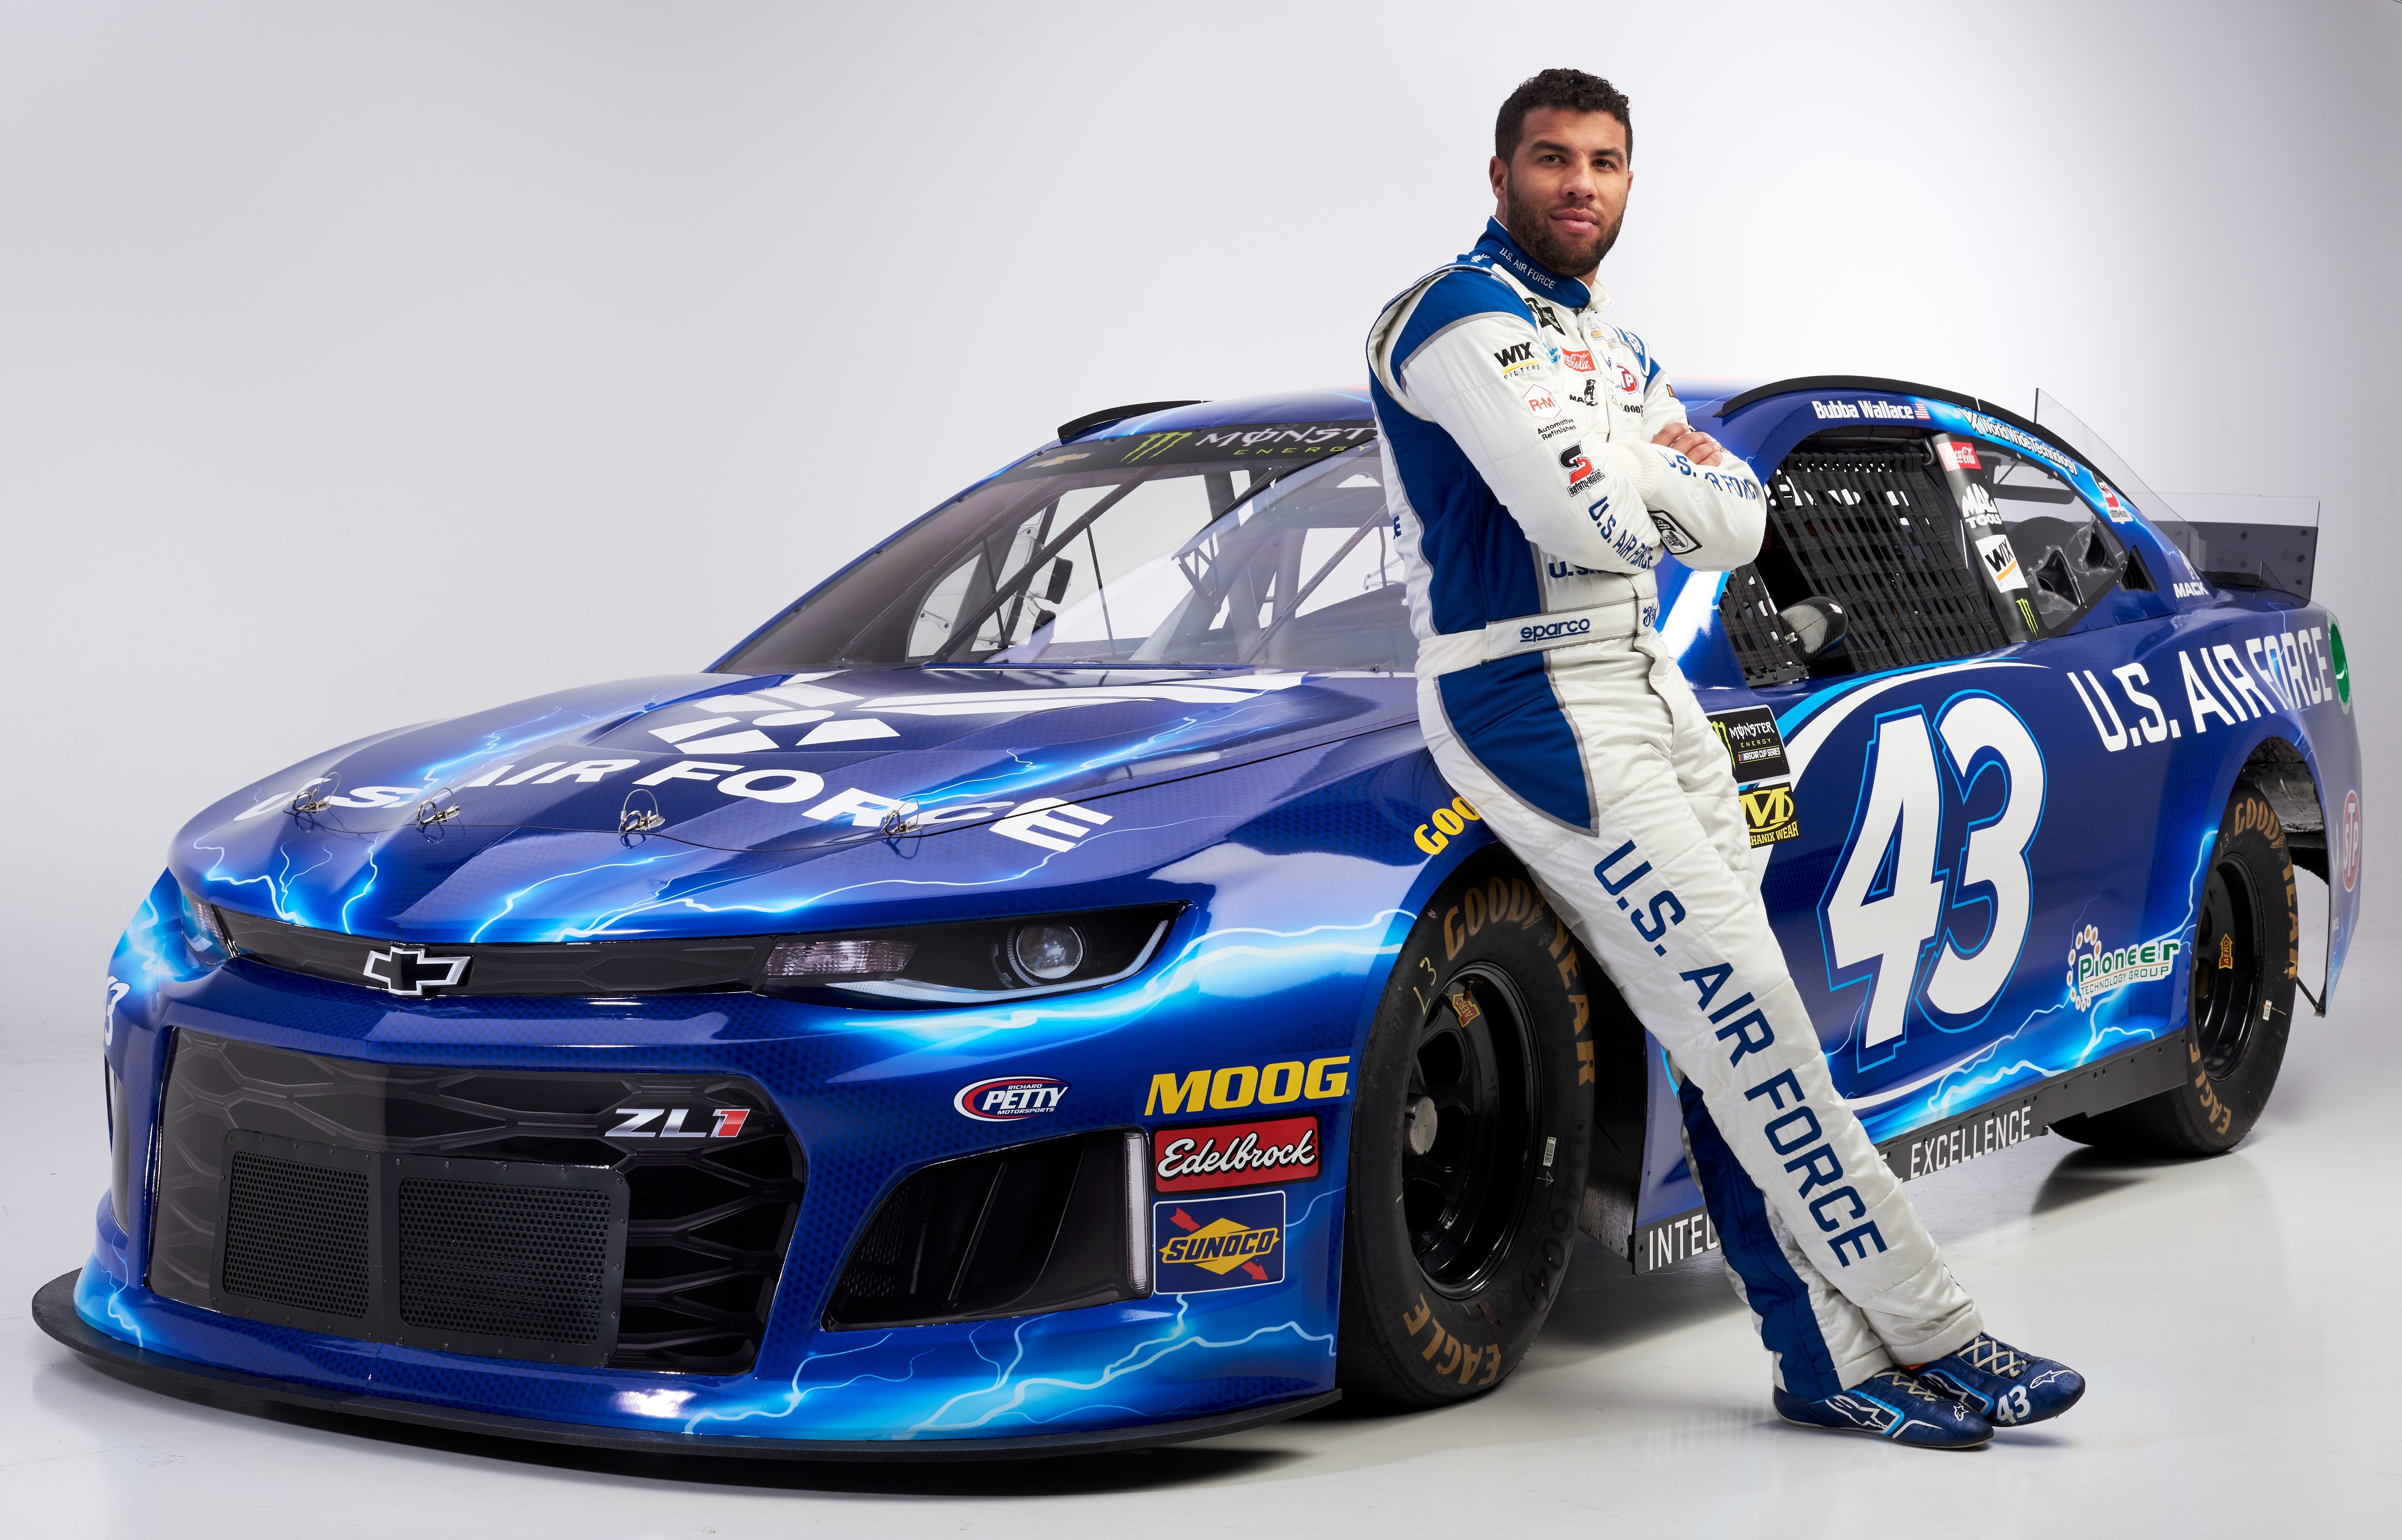 Darrell “Bubba” Wallace Jr. uses Performance Plus oil in his No. 43 Richard Petty Motorsports Chevrolet Camaro